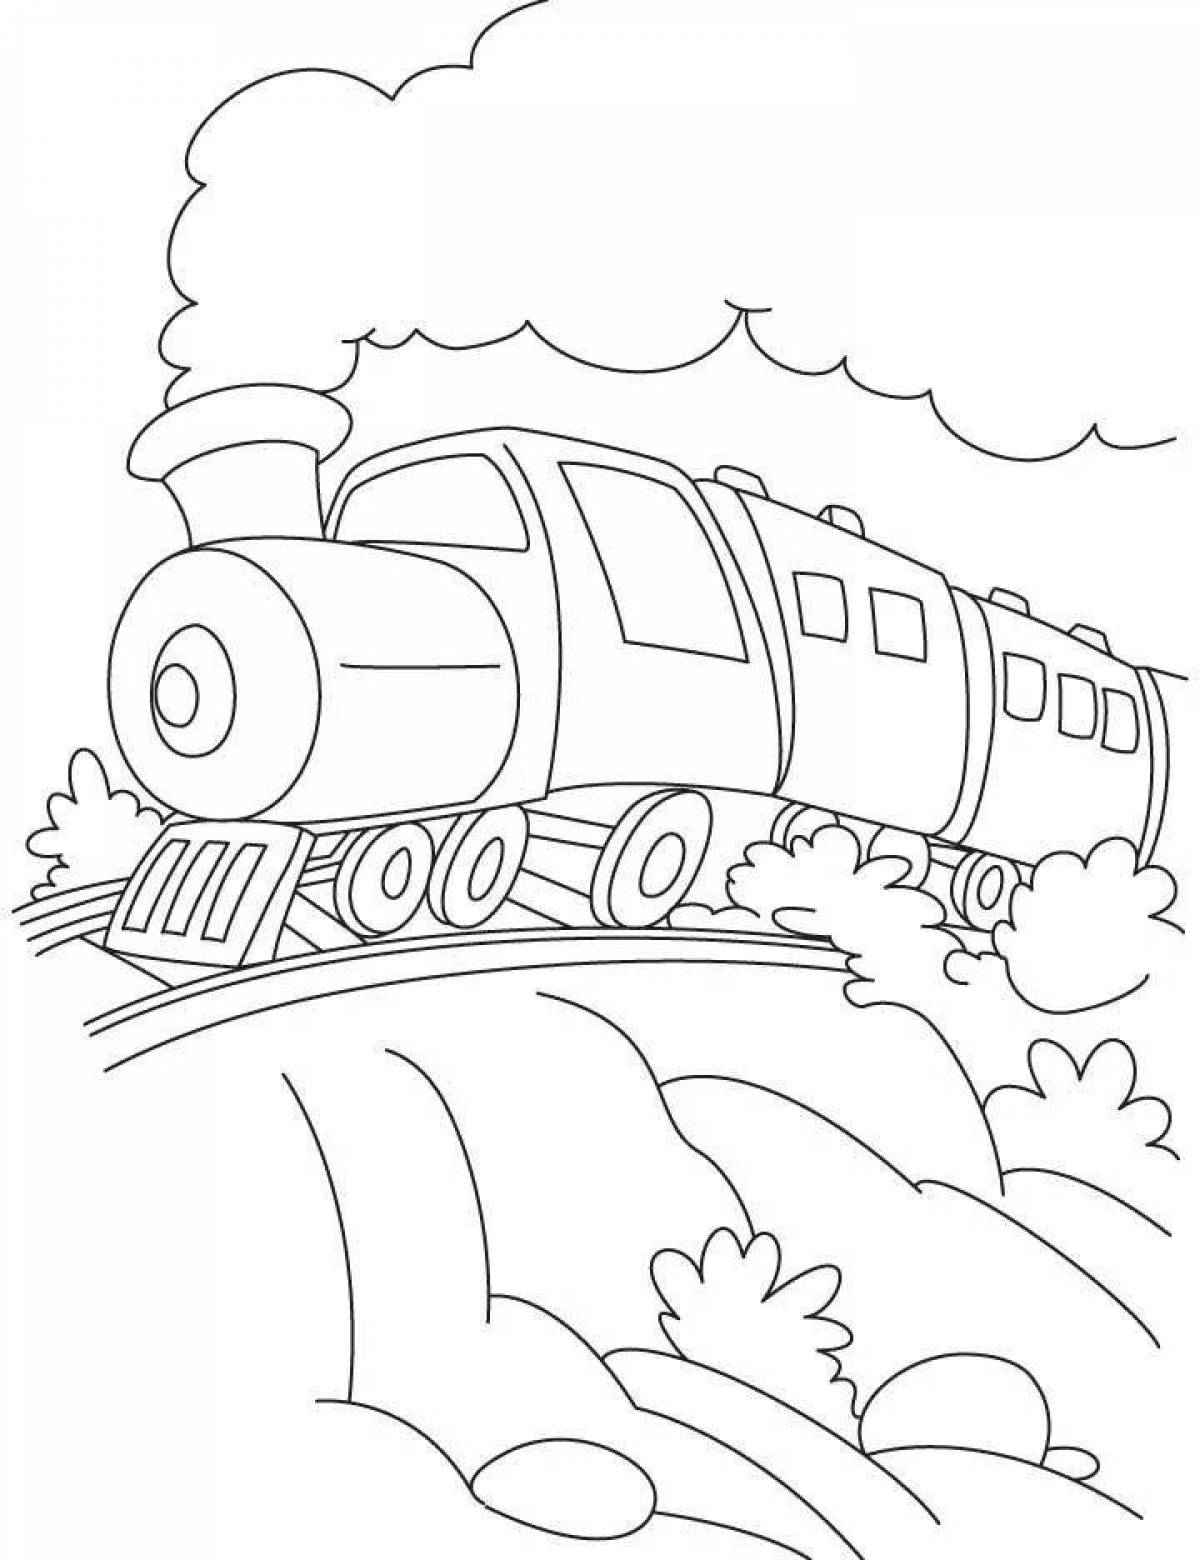 Freight train coloring page